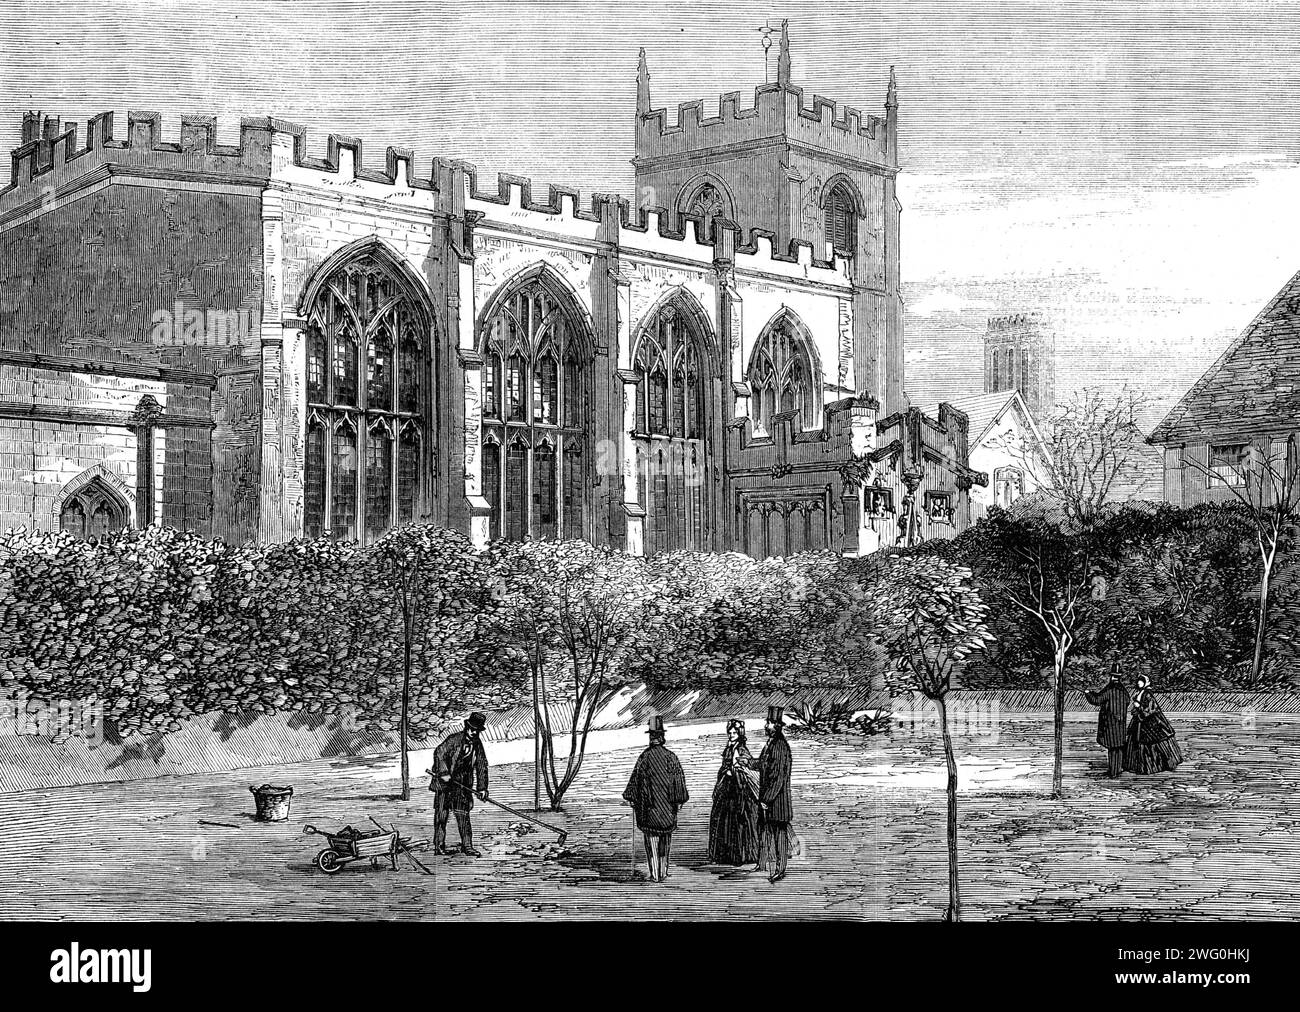 Shakspeare's Garden and the Old Guild Chapel, Stratford-on-Avon, 1862. View of '...the Great Garden of New Place...The entire property, formerly the gardens attached to New Place, proposed to be bought by the Shakspeare Fund, contains nearly an acre of ground...New Place itself, the house, was the corner house at the end of Chapel-street. It was the end of a row of houses, with no front garden, and its site was on the right-hand side of the garden here represented in the Engraving. The old Guild Chapel is almost the only building at Stratford in exactly the same state as it was in Shakspeare's Stock Photo